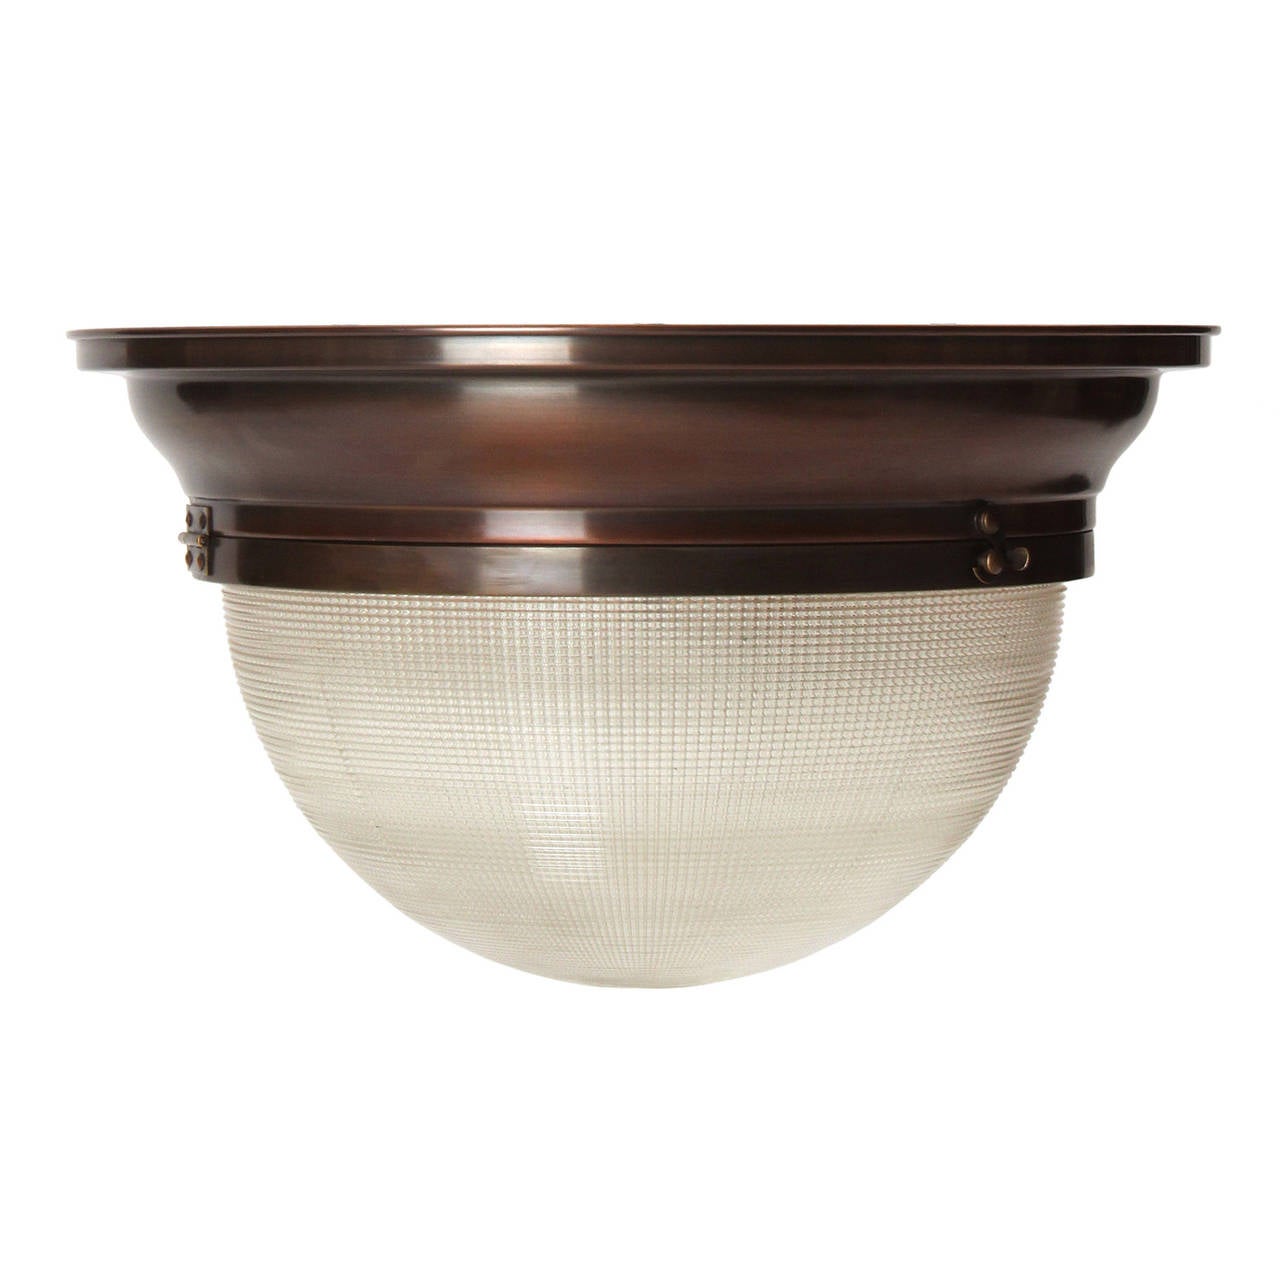 An elegant and finely manufactured flush-mount industrial light fixture that can function as a wall sconce or ceiling light, having a stepped patinated brass body and a domed prismatic glass shade.